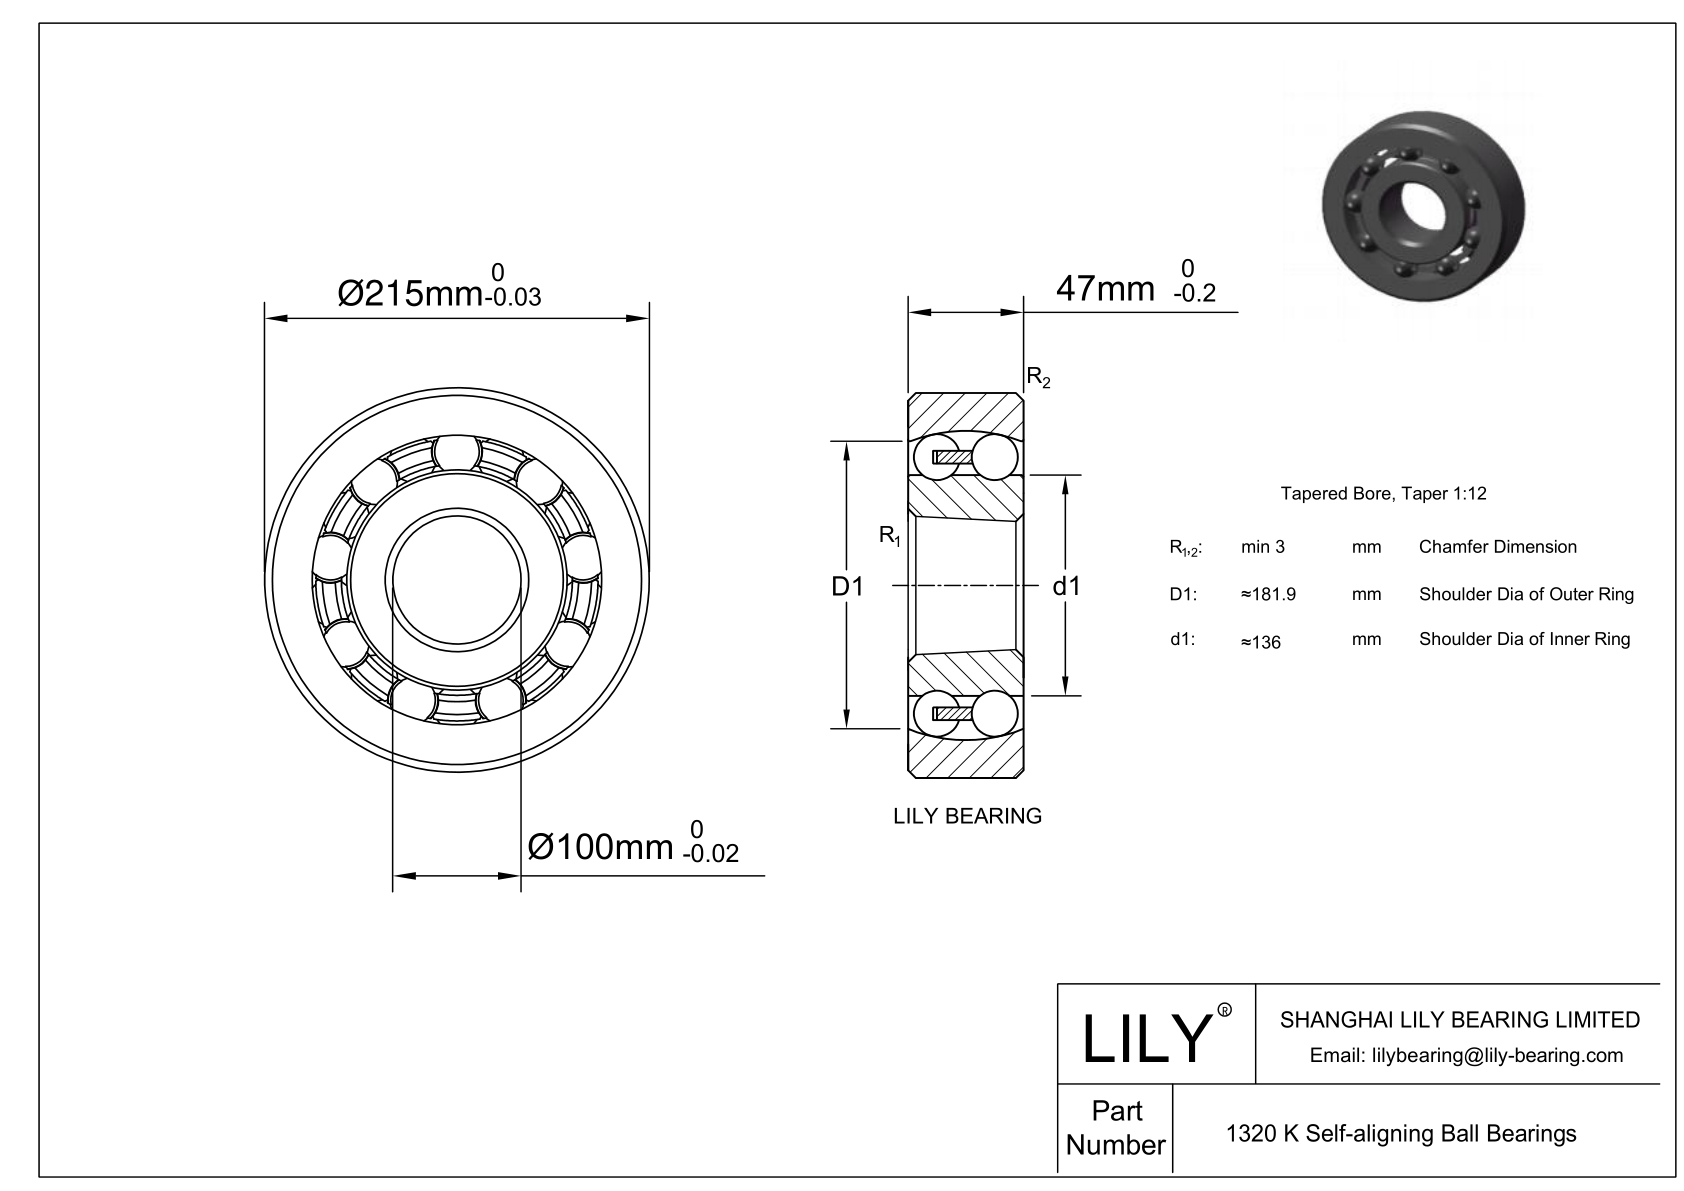 S1320 K Stainless Steel Self Aligning Ball Bearings cad drawing